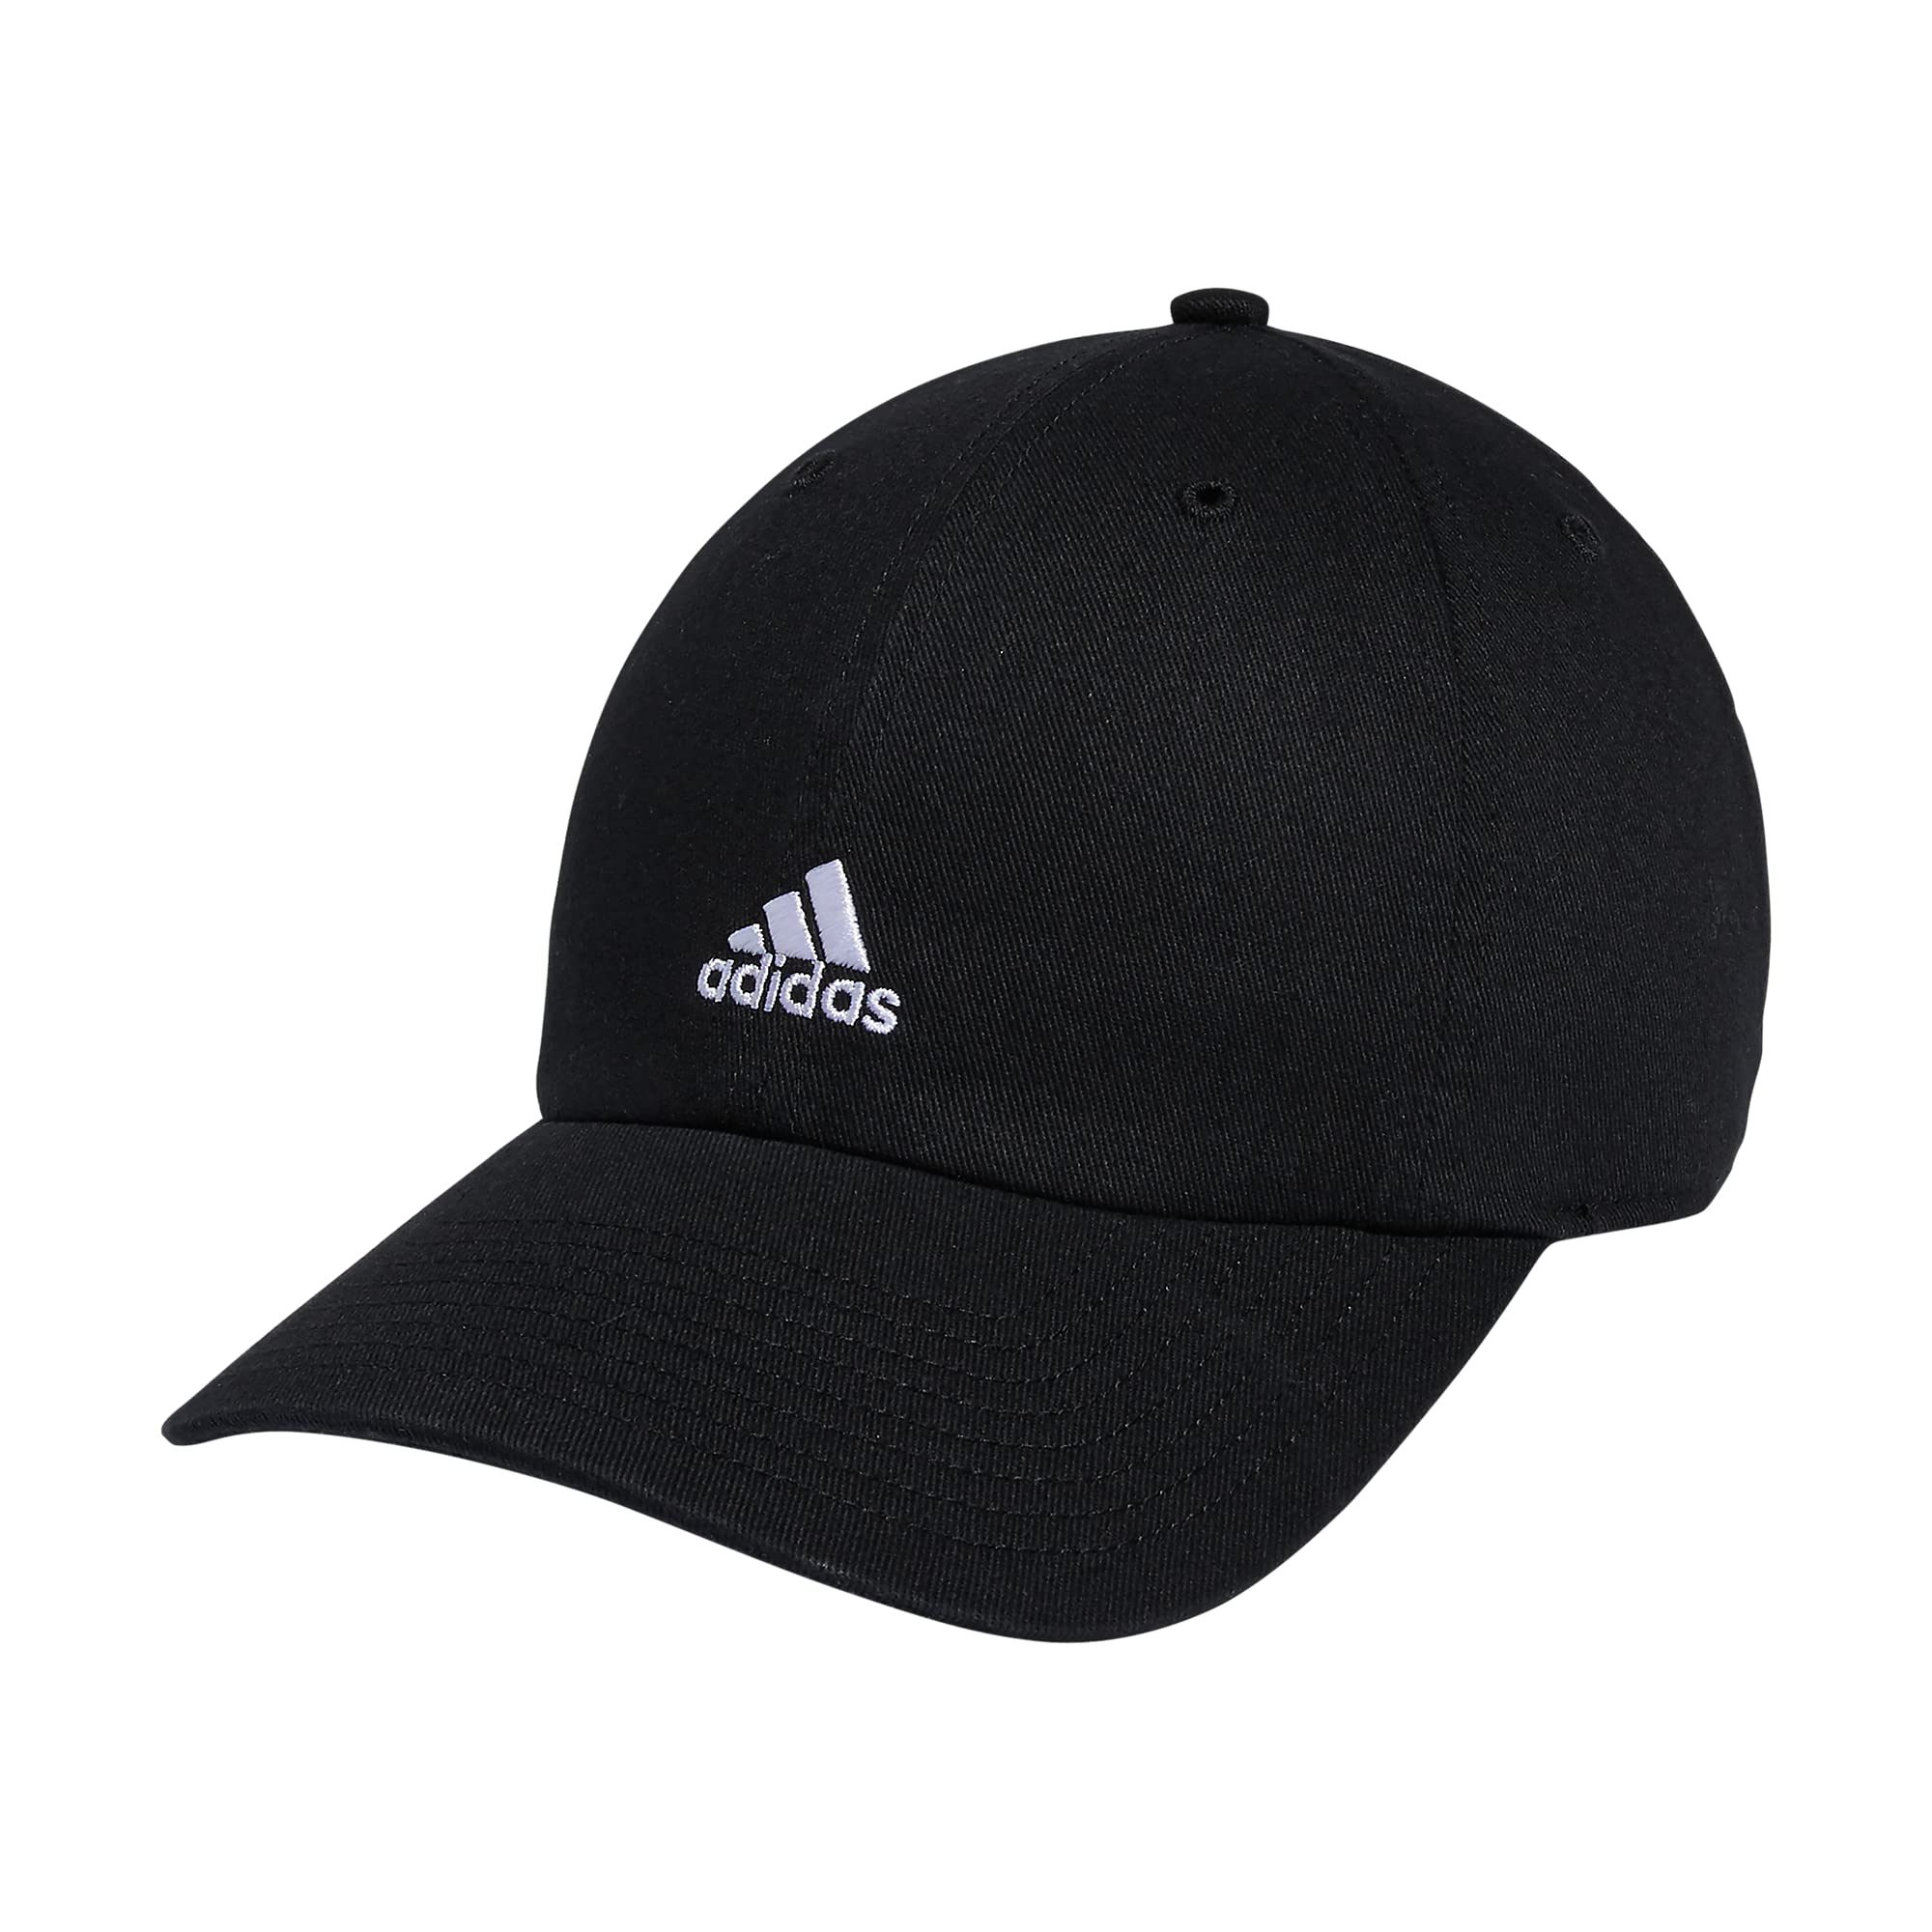 adidas Women's Saturday Relaxed Fit Adjustable Hat, Black/White, One Size $8.97 + Free Shipping w/ Prime or on $35+